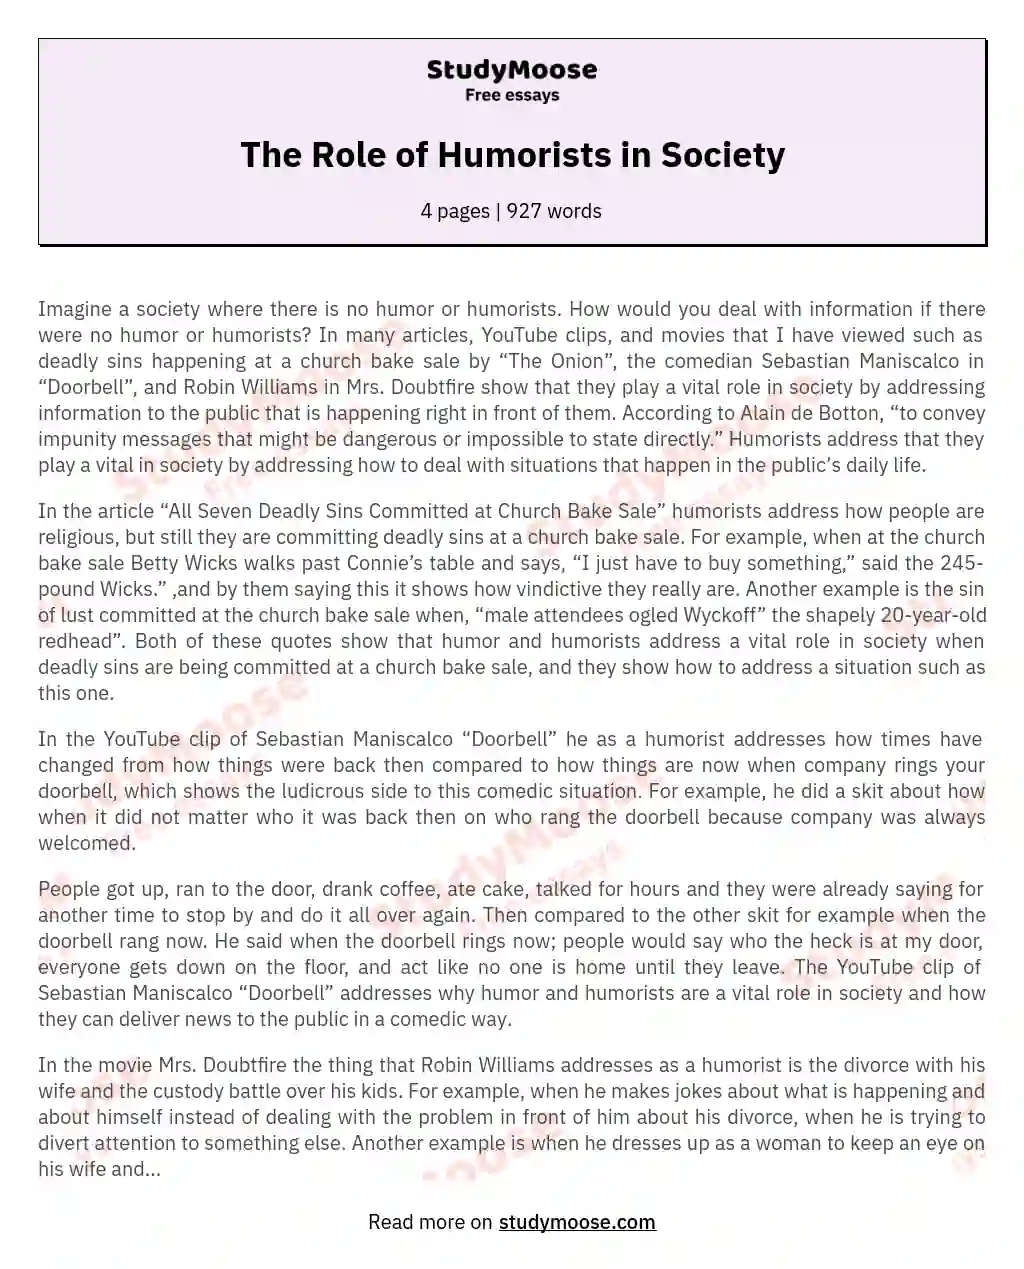 The Role of Humorists in Society essay